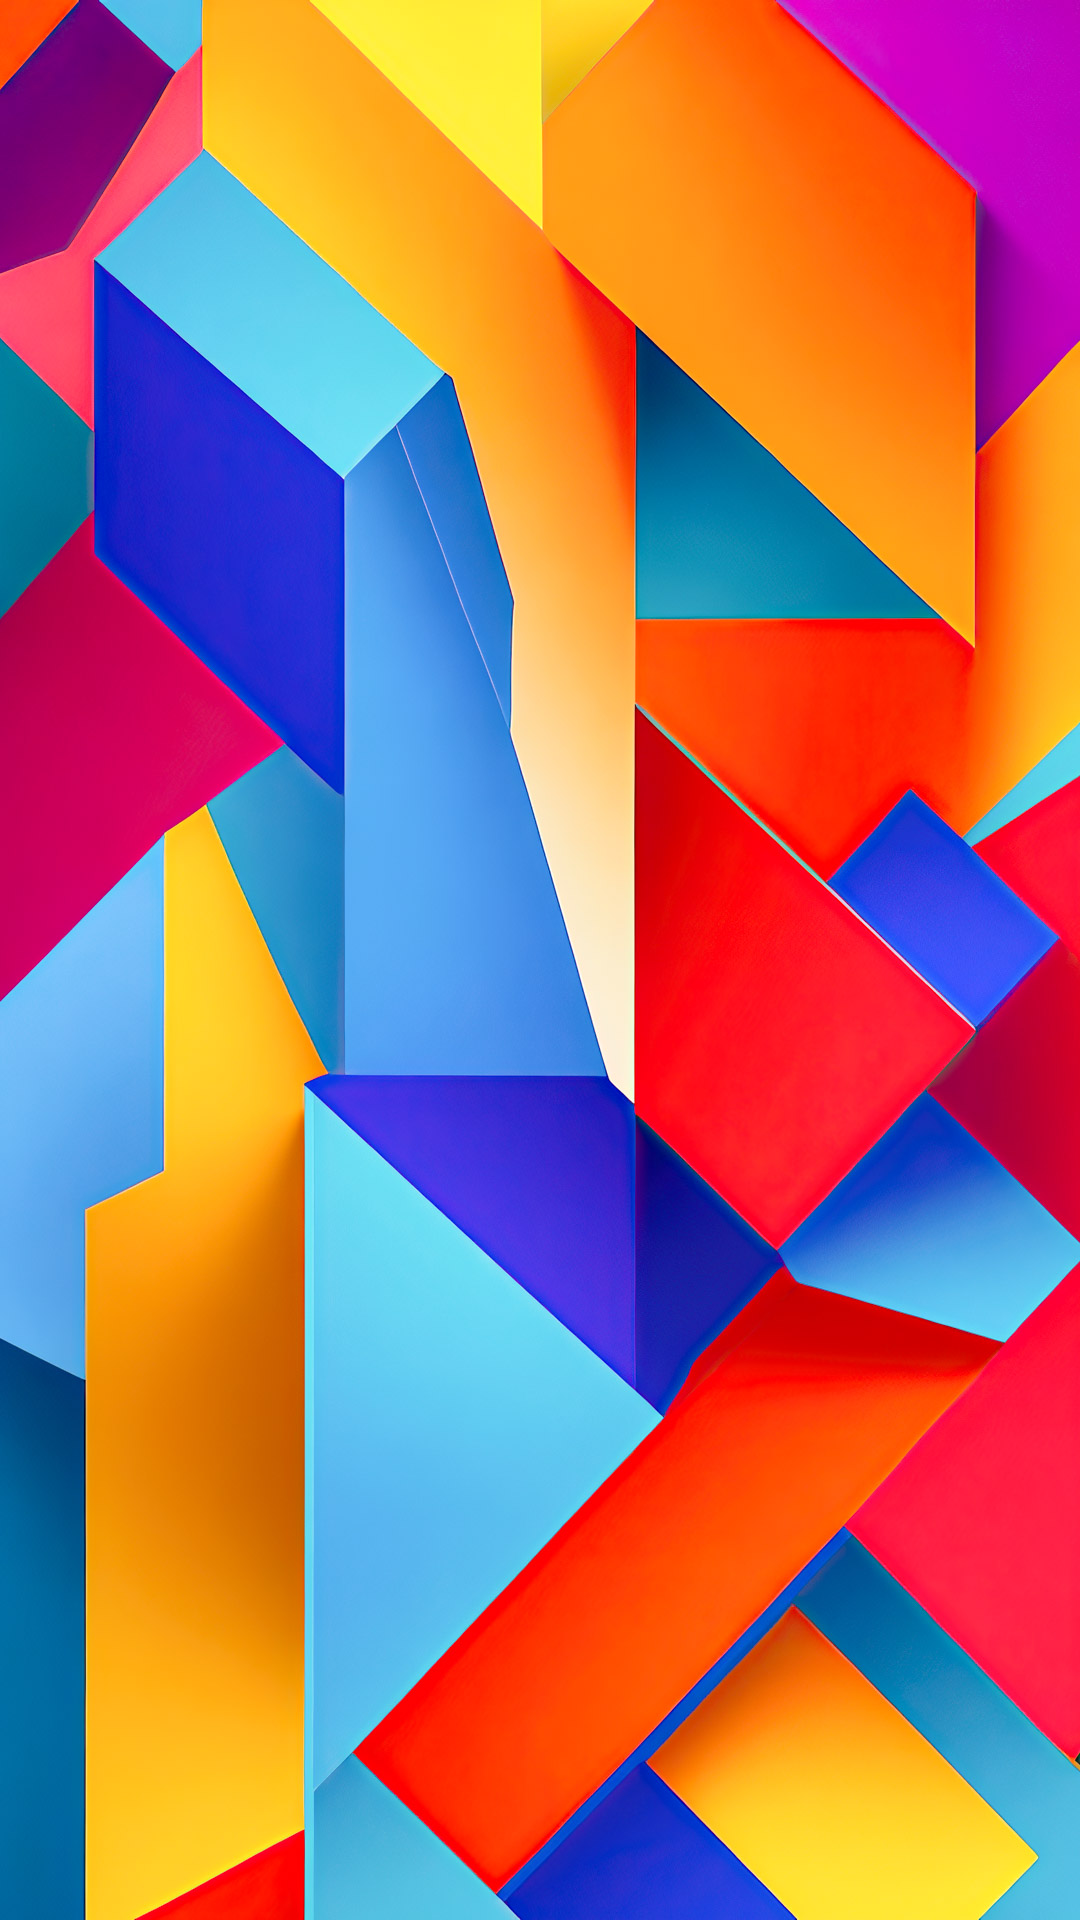 Transform your phone screen into a masterpiece with our HD abstract wallpapers, featuring simple colorful geometric shapes on a vibrant background.